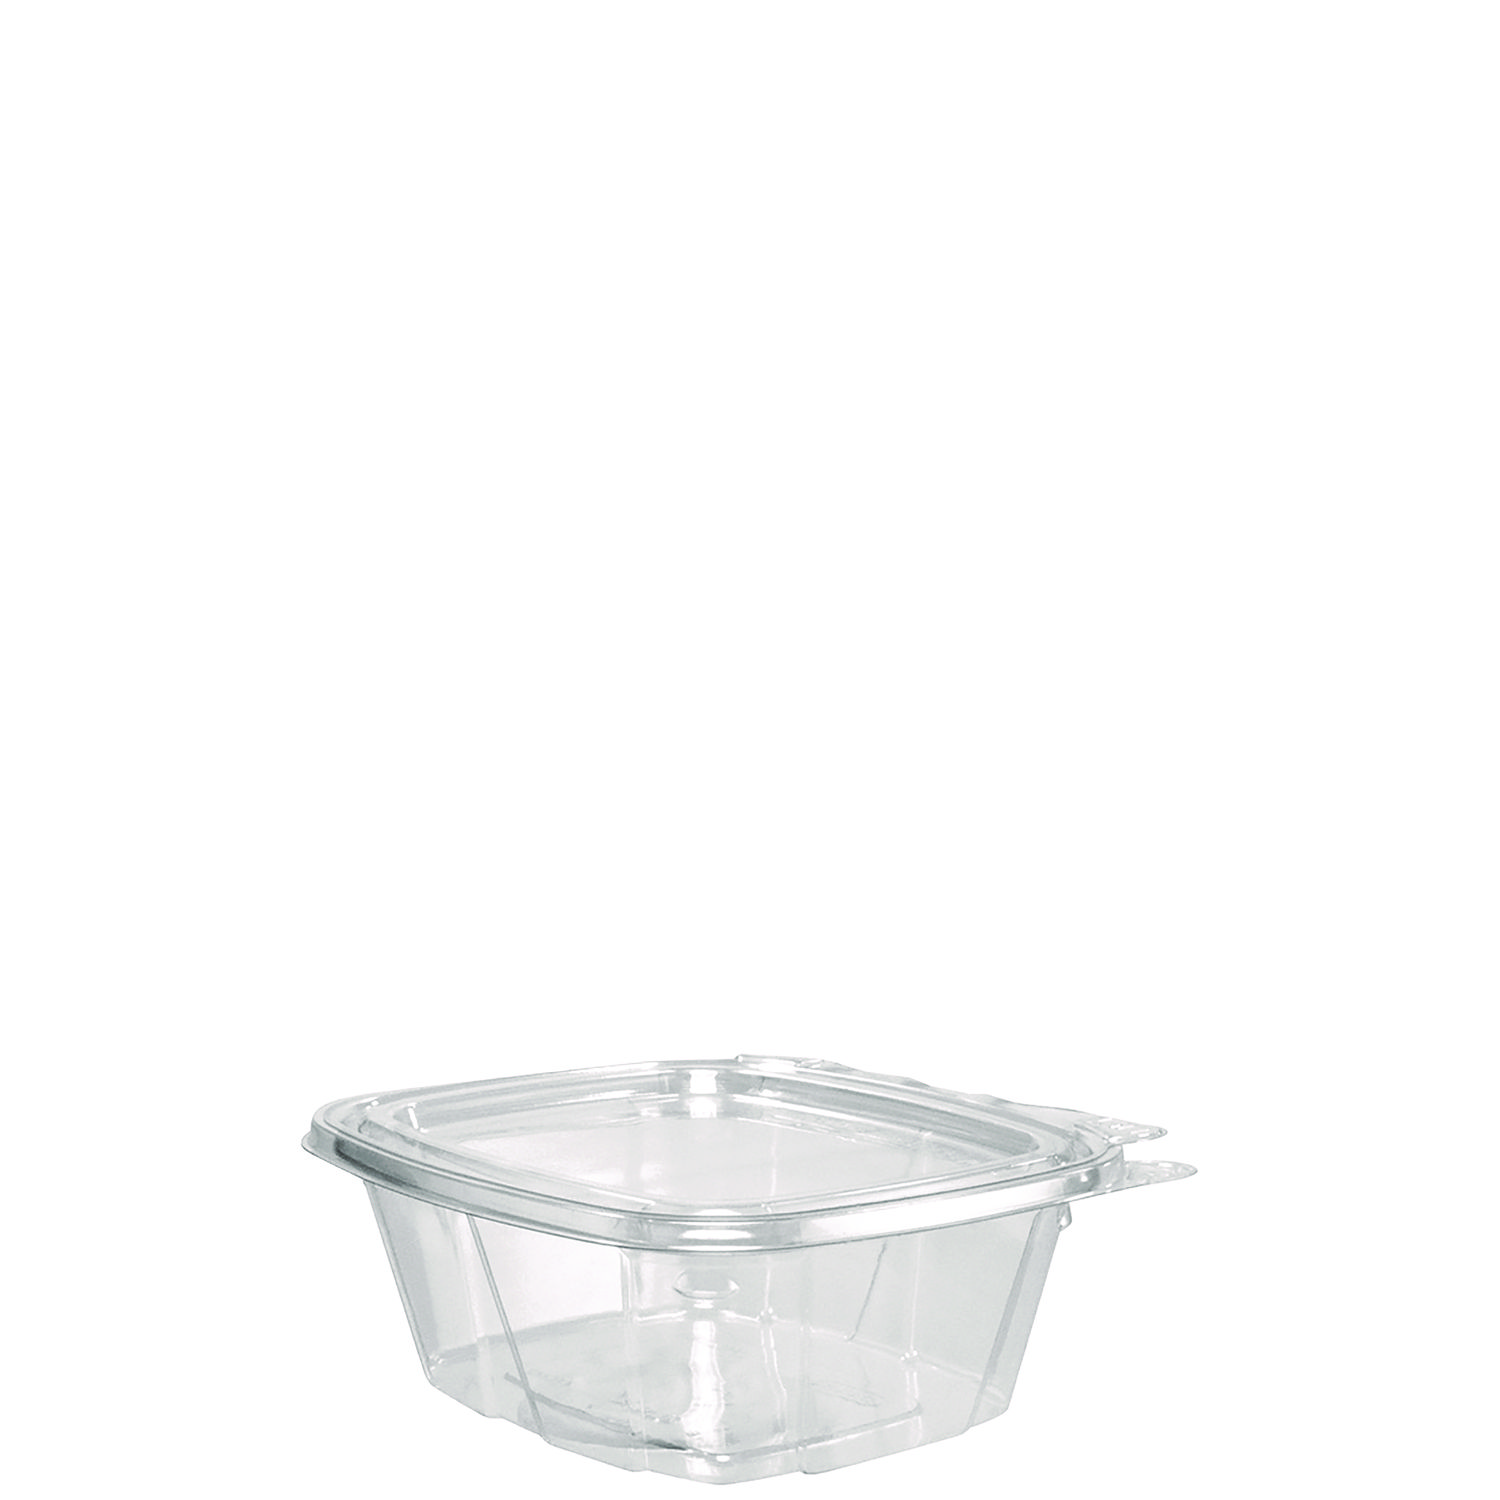 4 Compartments Clear Containers With Tamper Evident For Snacks and